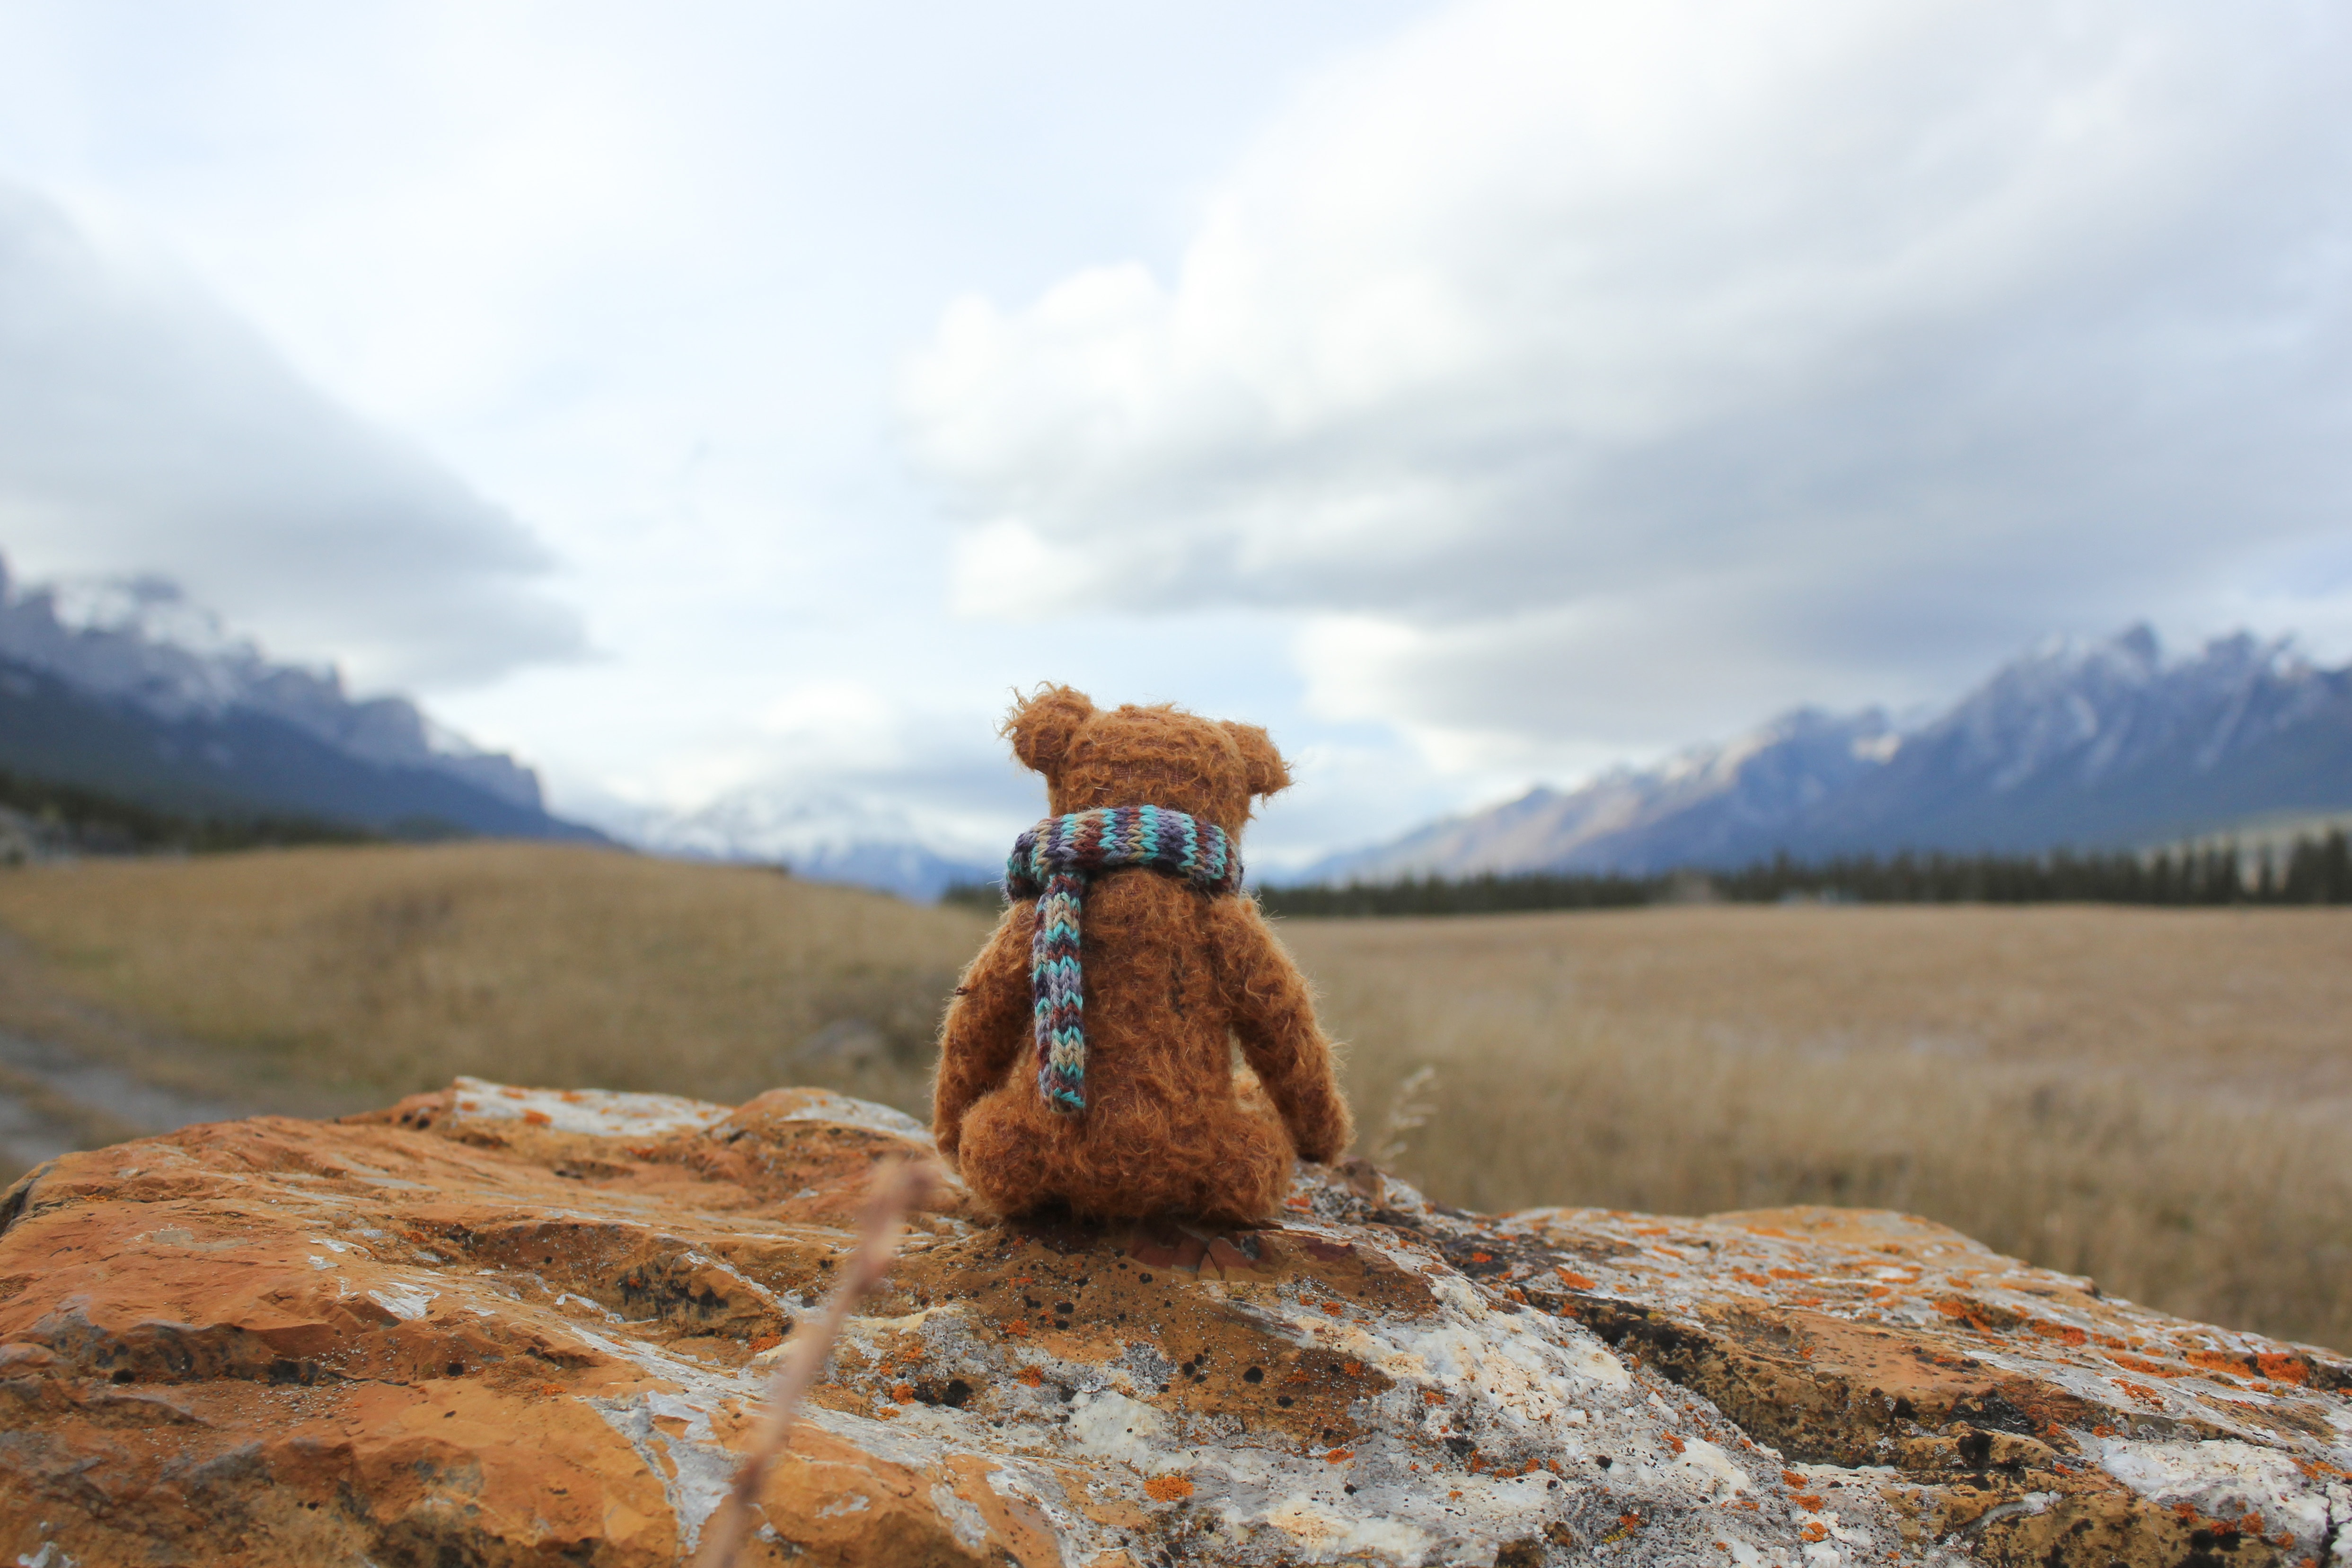 61620 download wallpaper teddy bear, rock, miscellanea, miscellaneous, toy, stone, loneliness screensavers and pictures for free